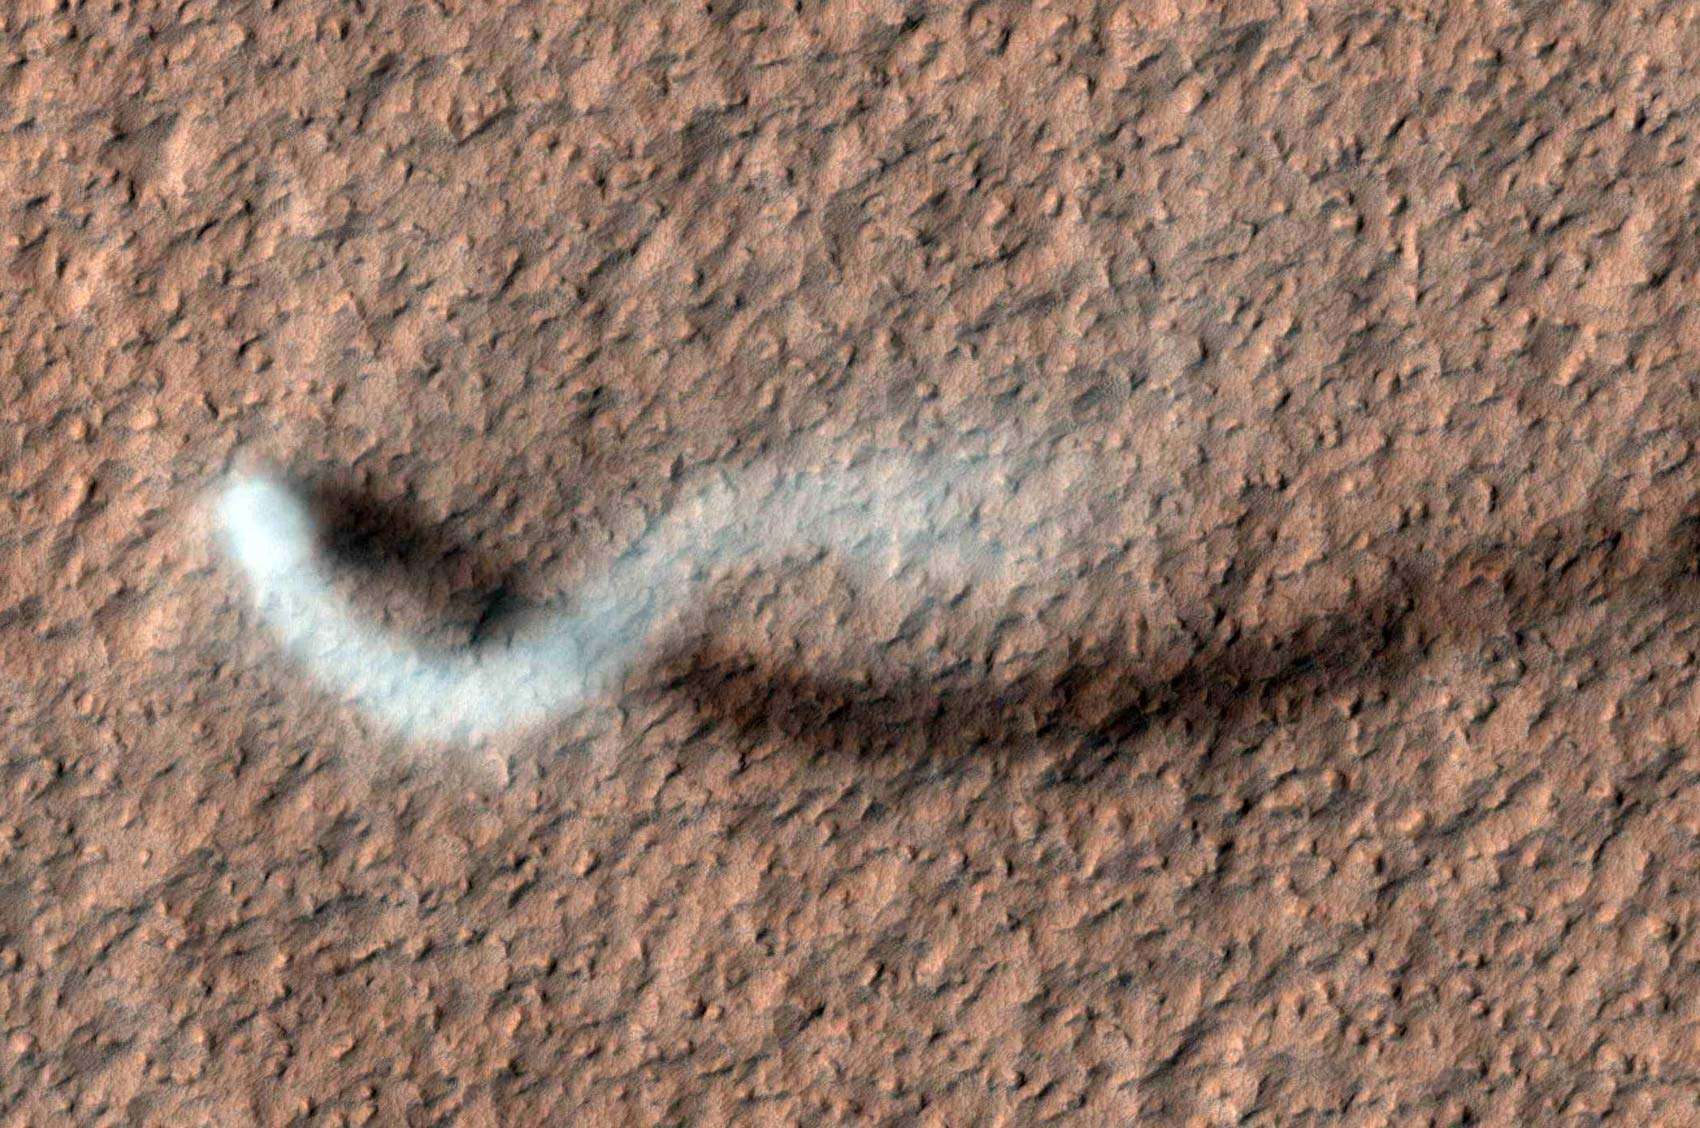 A towering dust devil on Mars seen from orbit. The plume was 30 meters wide and 800 meters high. Credit: NASA/JPL-Caltech/University of Arizona